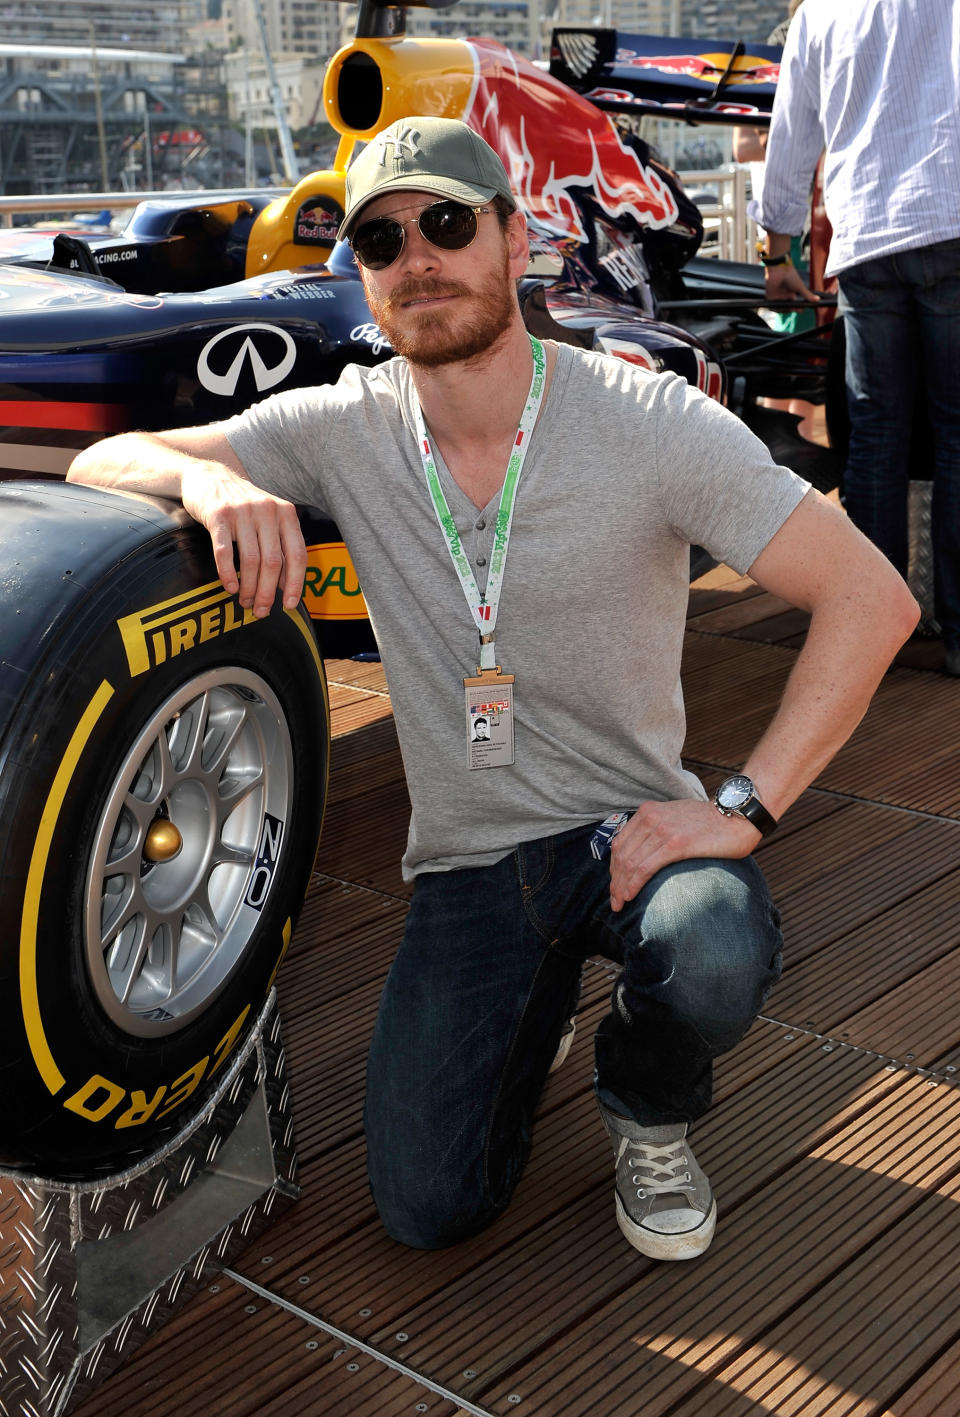 Michael Fassbender on the Red Bull Energy Station during qualifying for the Monaco Formula One Grand Prix at the Monte Carlo Circuit on May 26, 2012 in Monte Carlo, Monaco. (Gareth Cattermole/Getty Images)